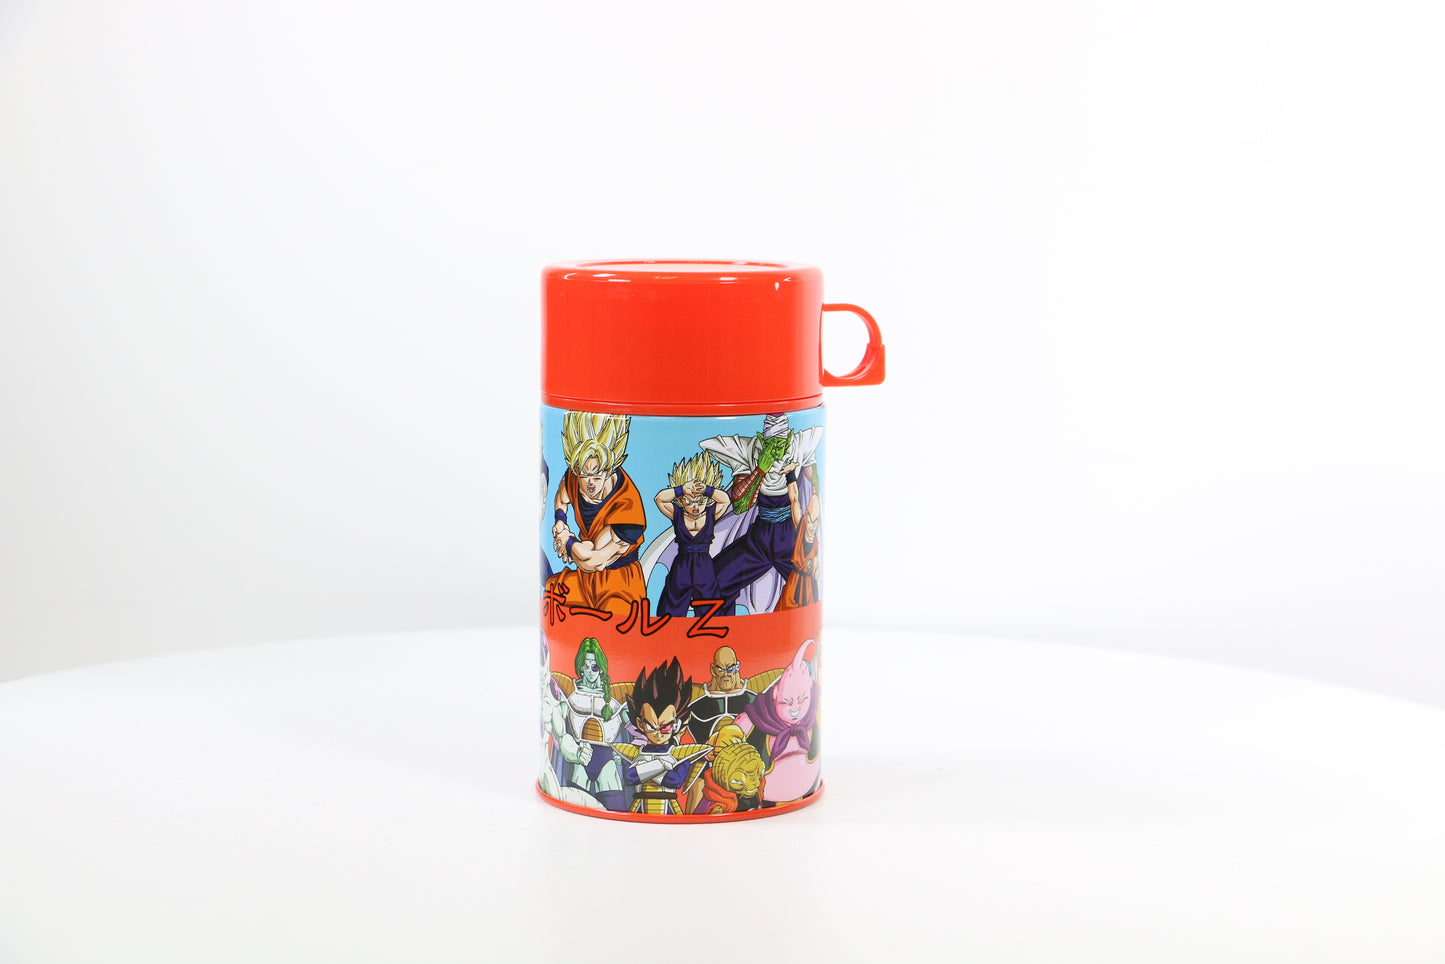 Tin Titans - Dragon Ball Z Fighters Lunch Box w/ Beverage Container - Previews Exclusive